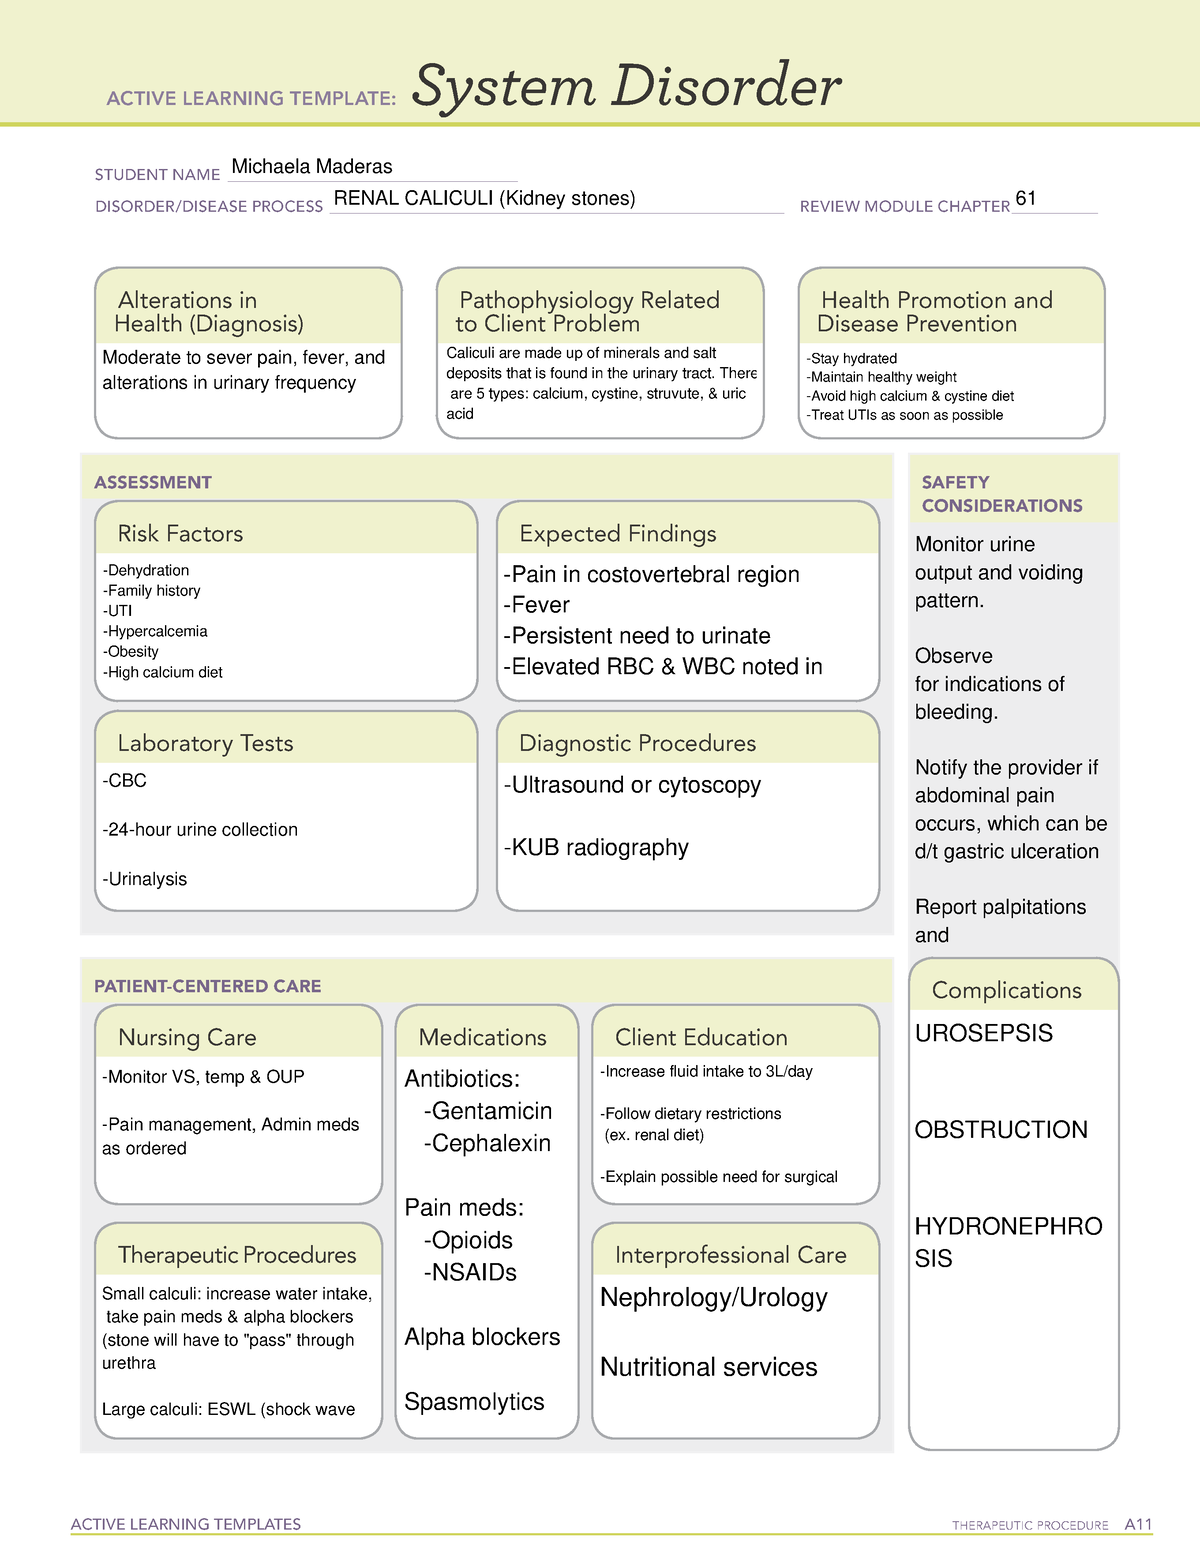 Renal Calculi System Disorder ACTIVE LEARNING TEMPLATES THERAPEUTIC